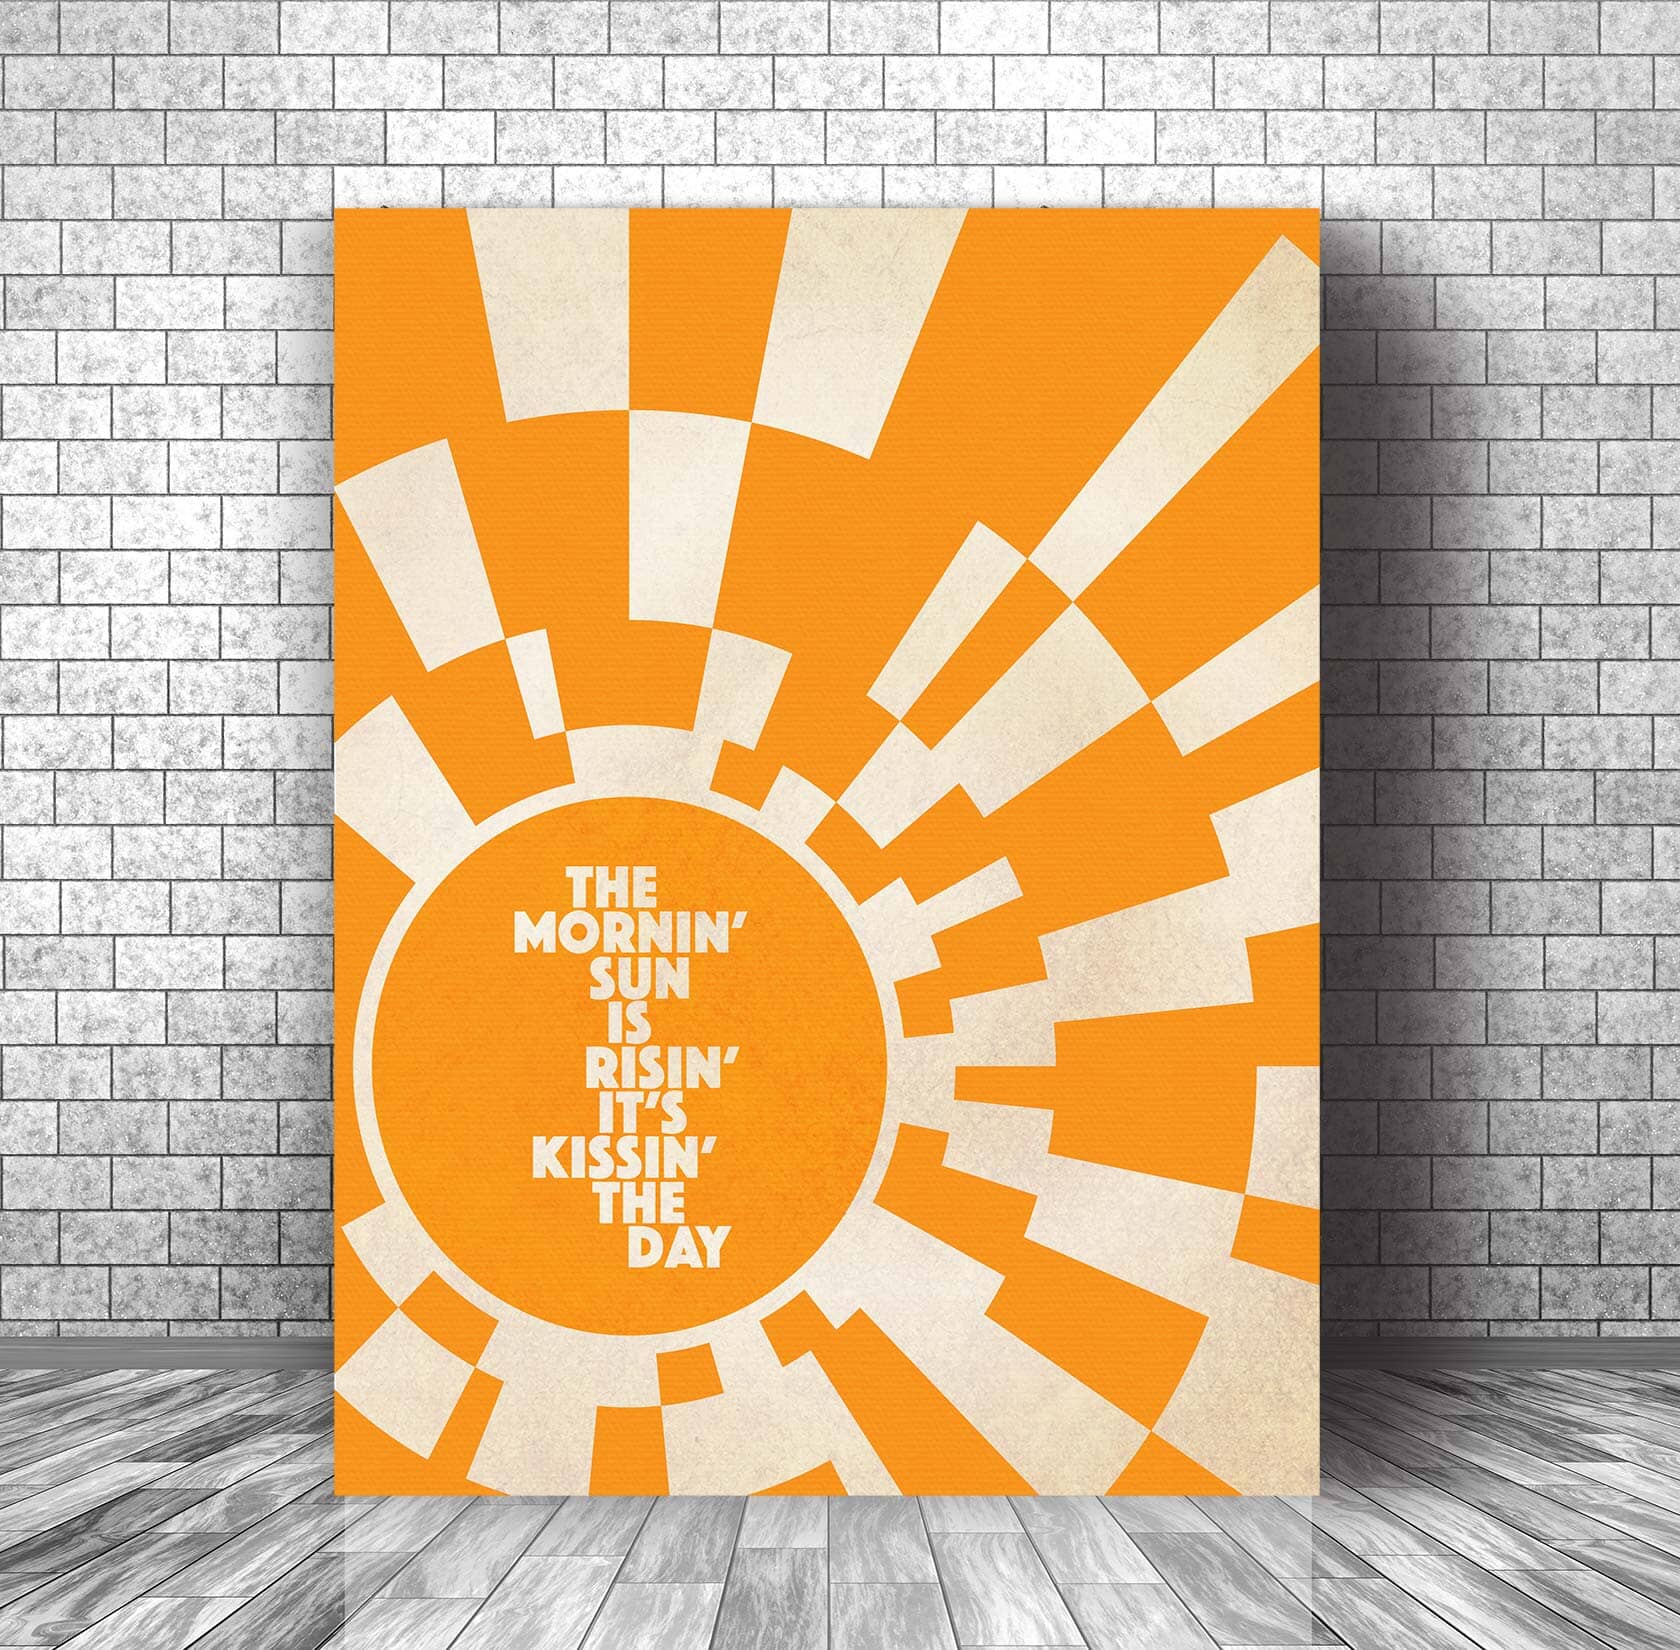 Wheel in the Sky by Journey - Song Lyrics Music Quote Art Song Lyrics Art Song Lyrics Art 11x14 Canvas Wrap 